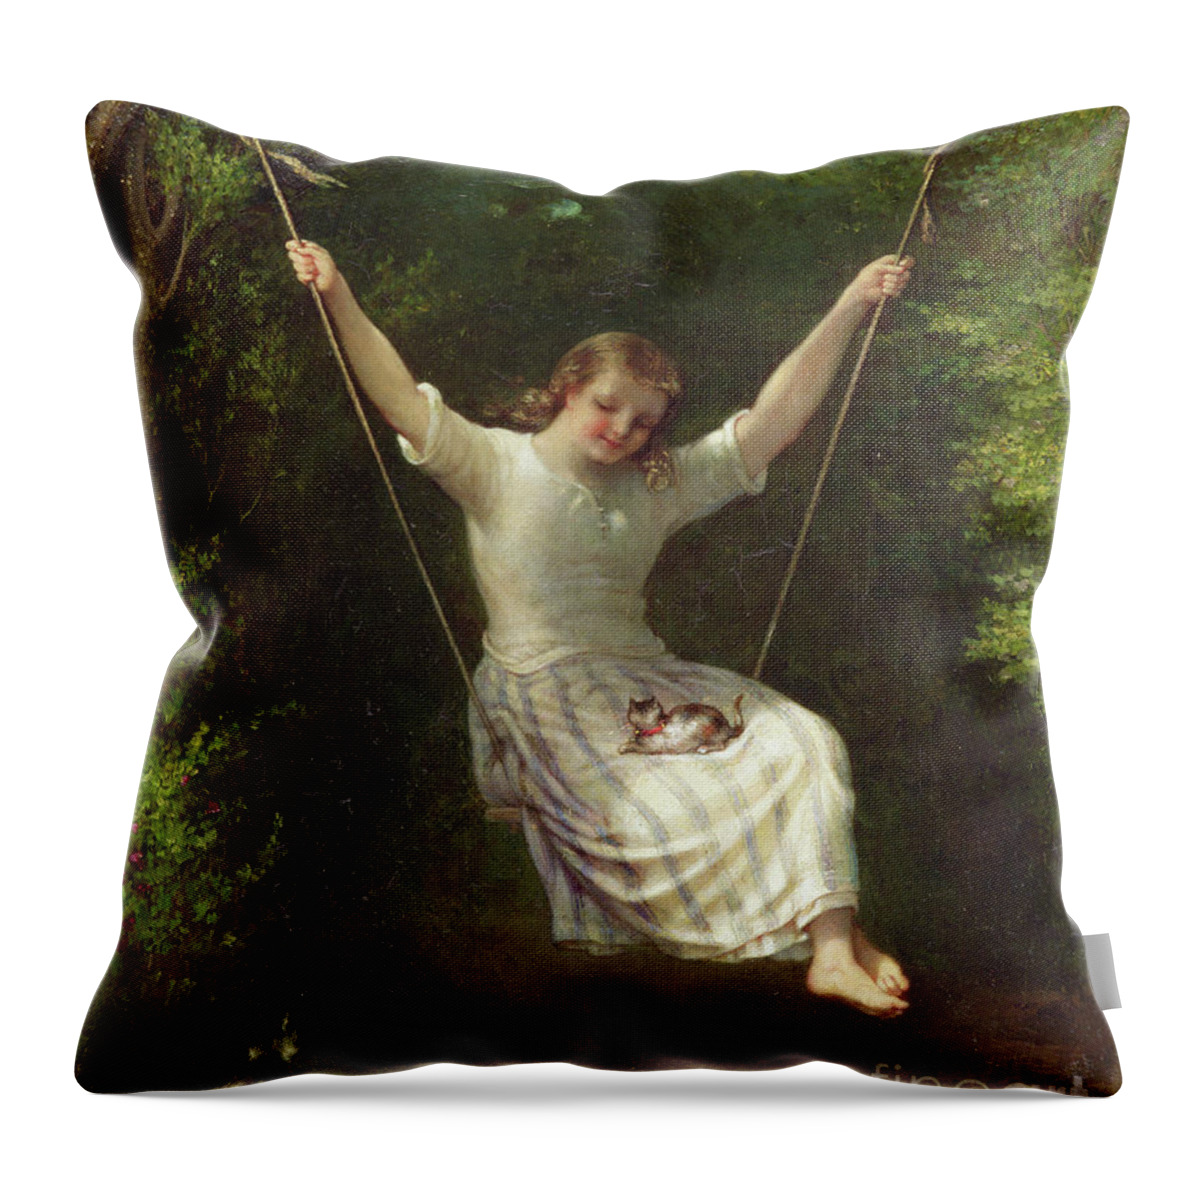 Tree Throw Pillow featuring the painting The Swing by Hendrieus Jacobus Burgers